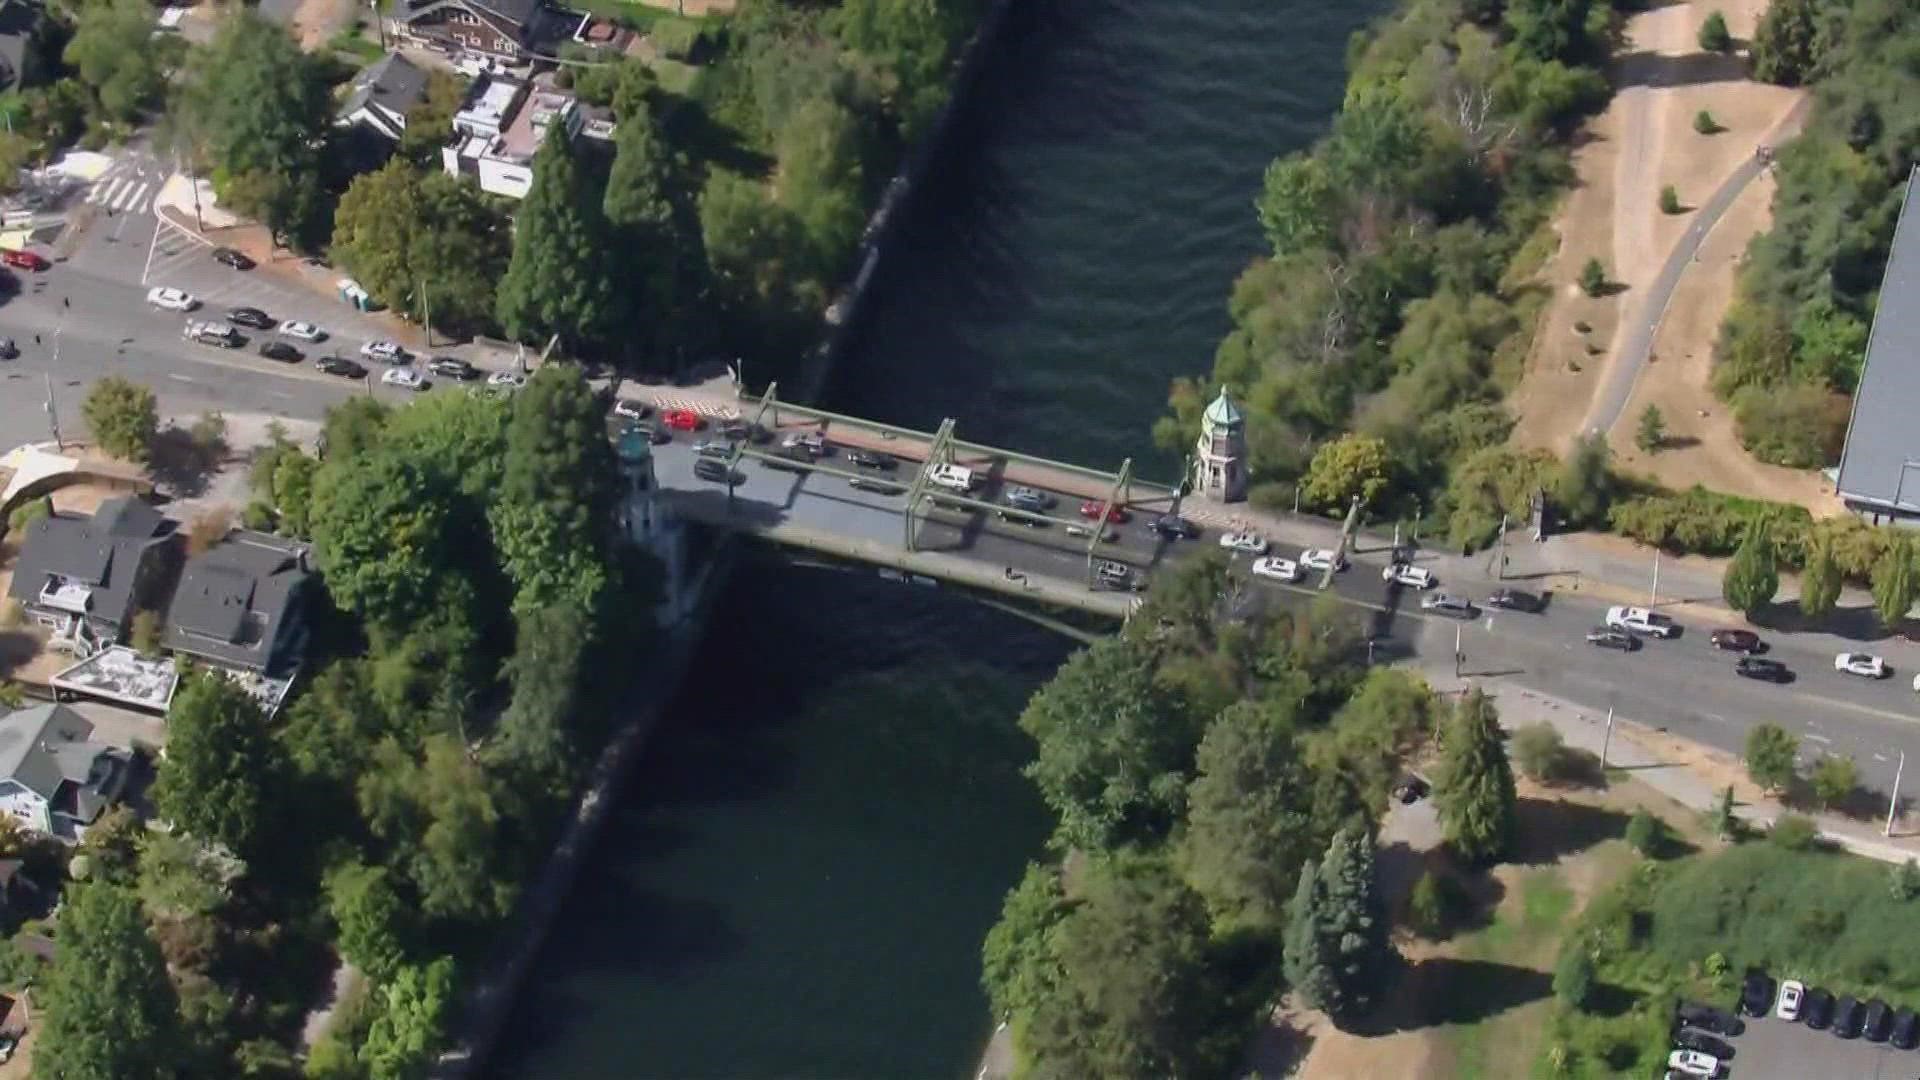 Both directions of the Montlake Bridge will close to vehicle traffic starting at 10 p.m. Friday, Oct. 29 and last through 5 a.m. Monday, Nov. 1.